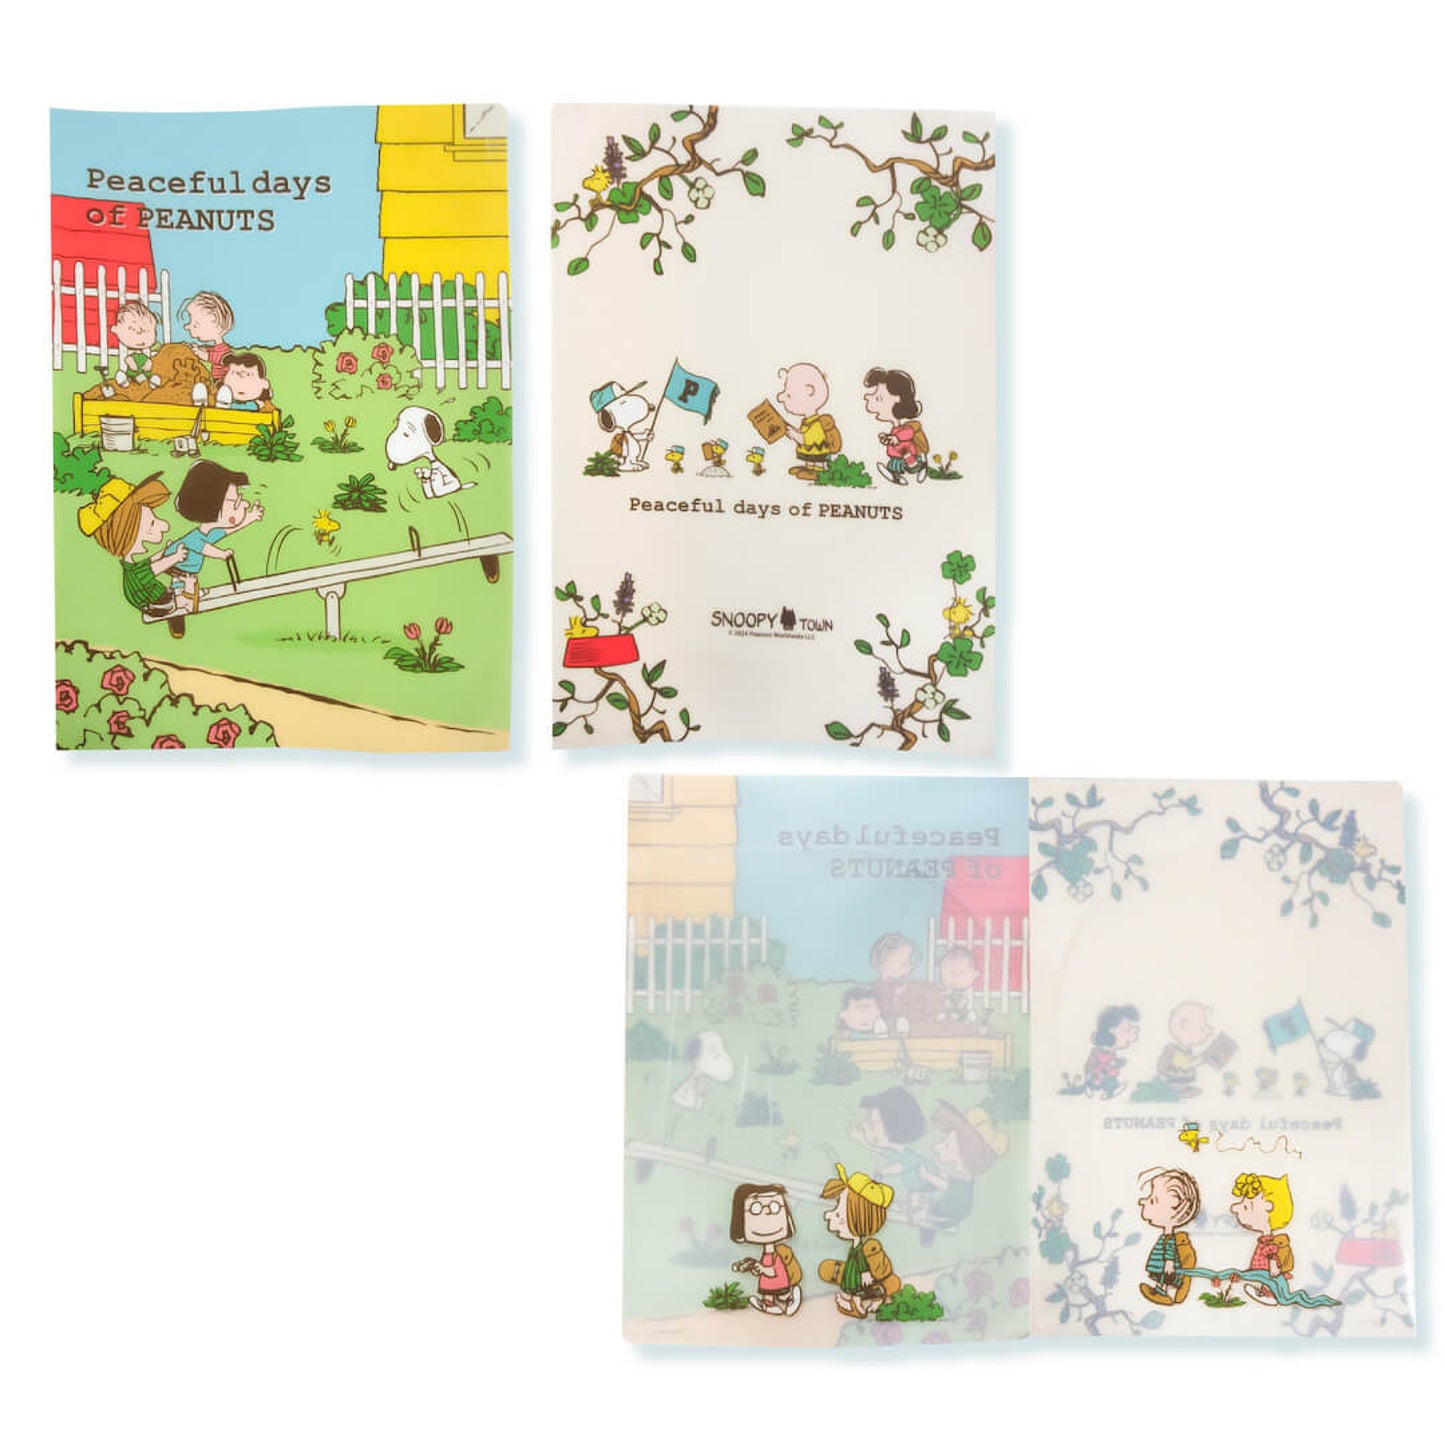 【Pre-order】SNOOPY TOWN Limited "Peaceful days of PEANUTS" - Stationery